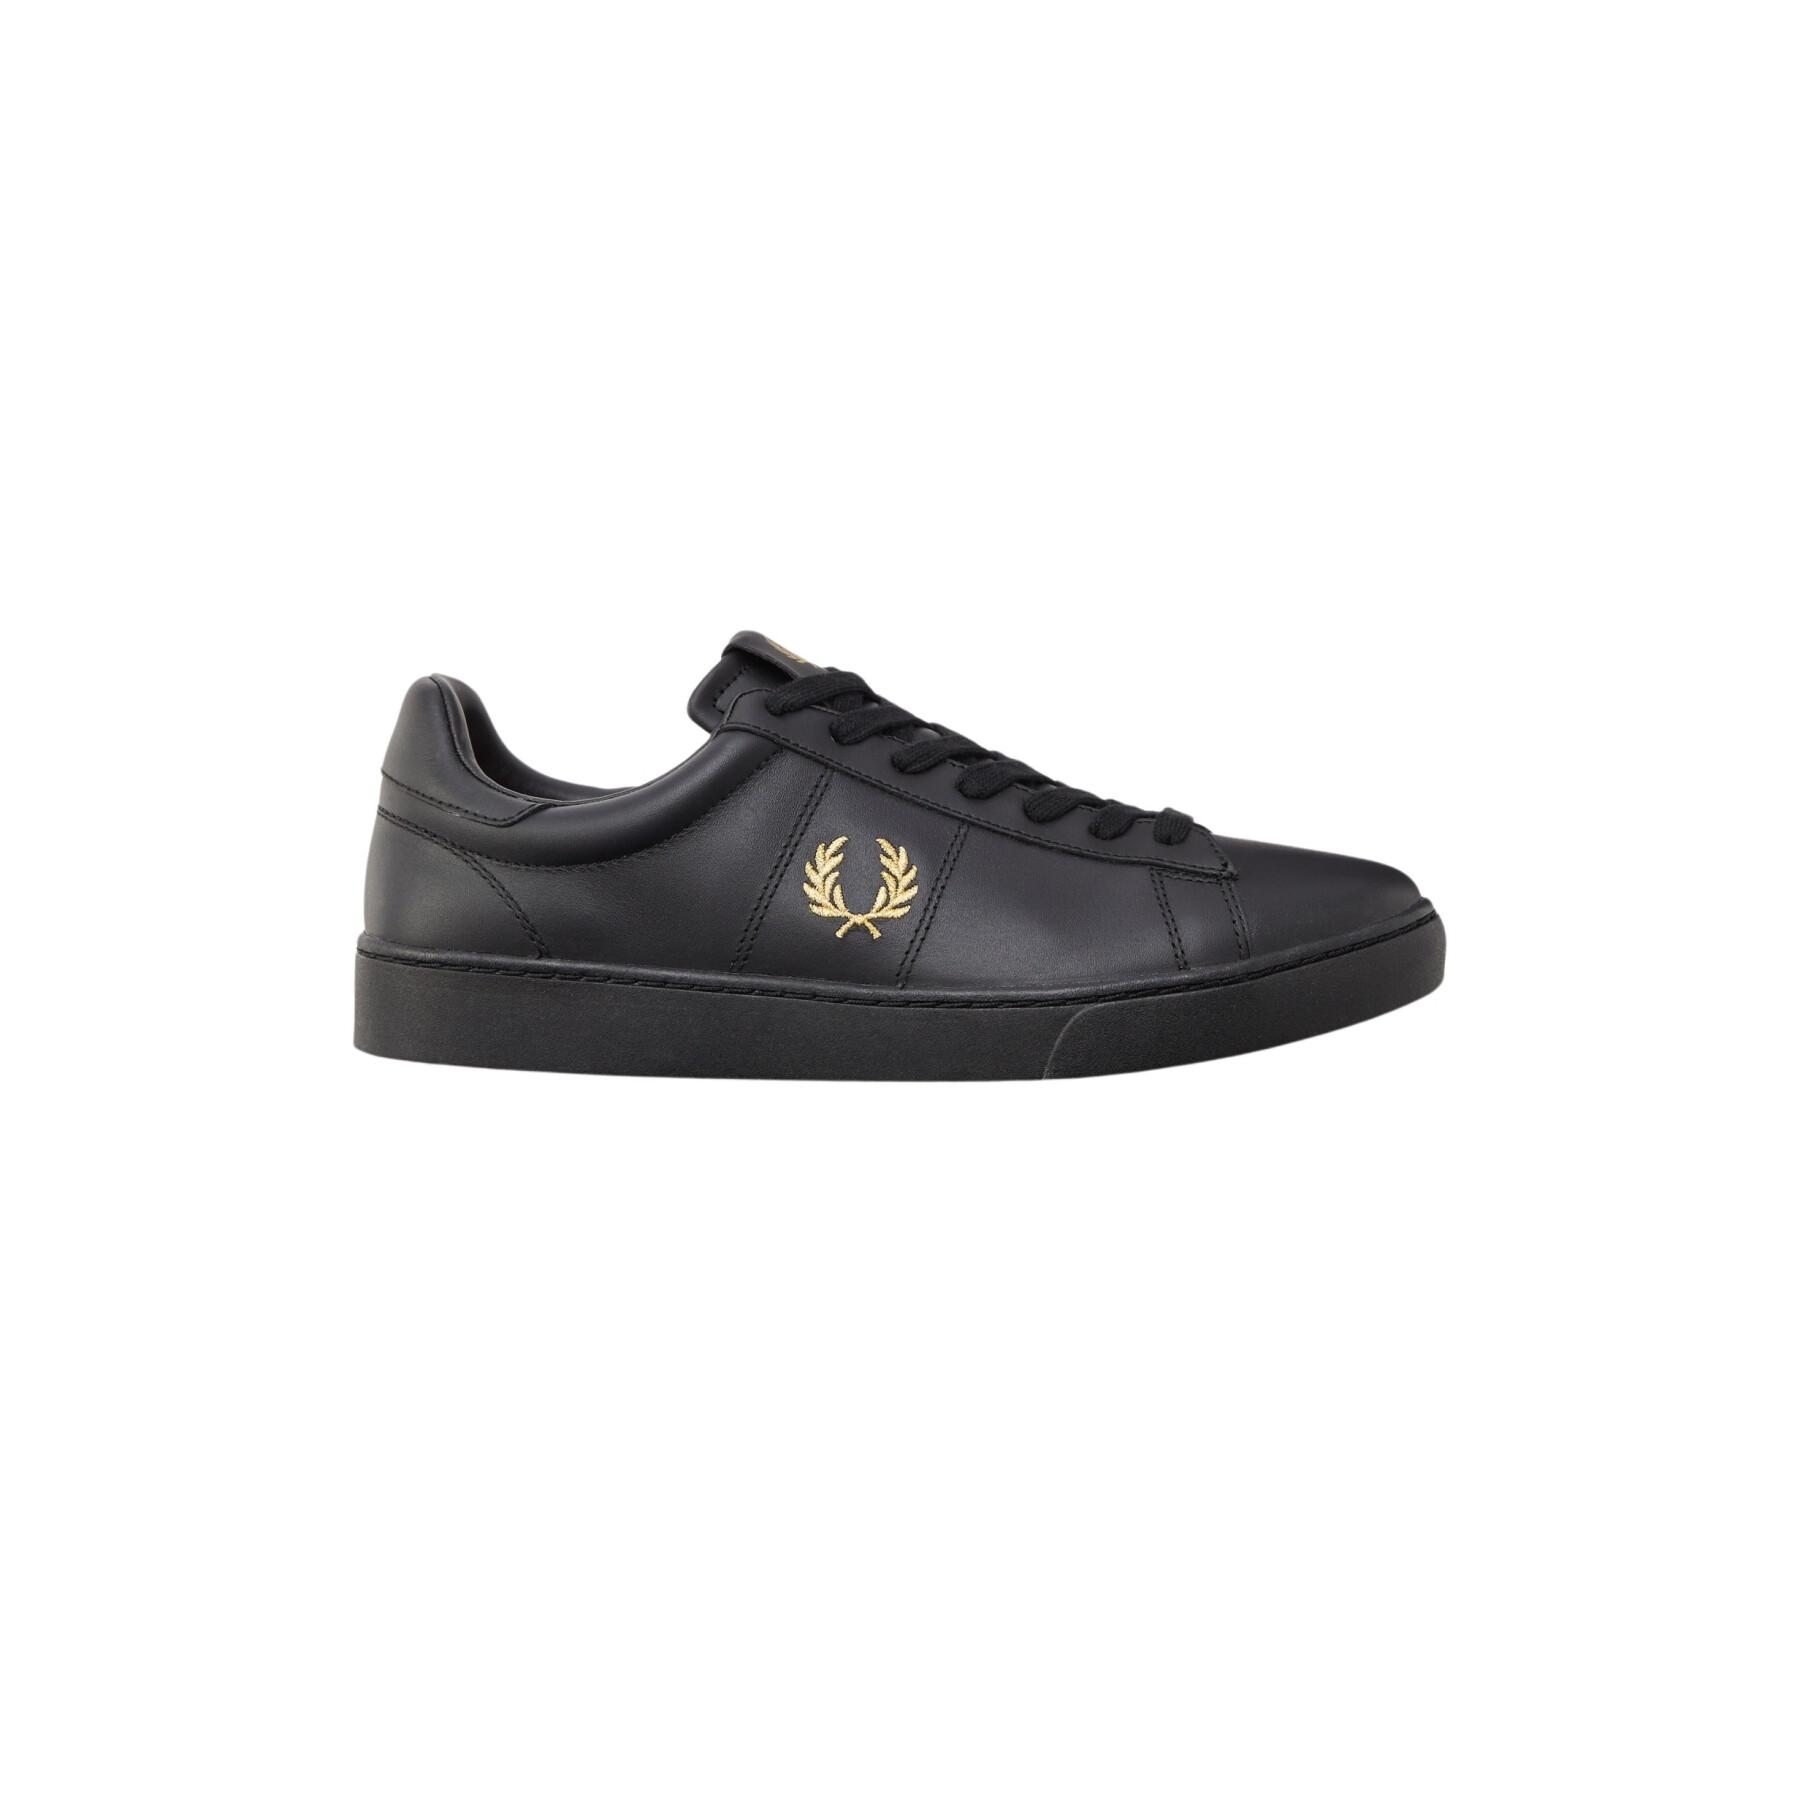 Formadores Fred Perry B300 Scotchgrain Leather